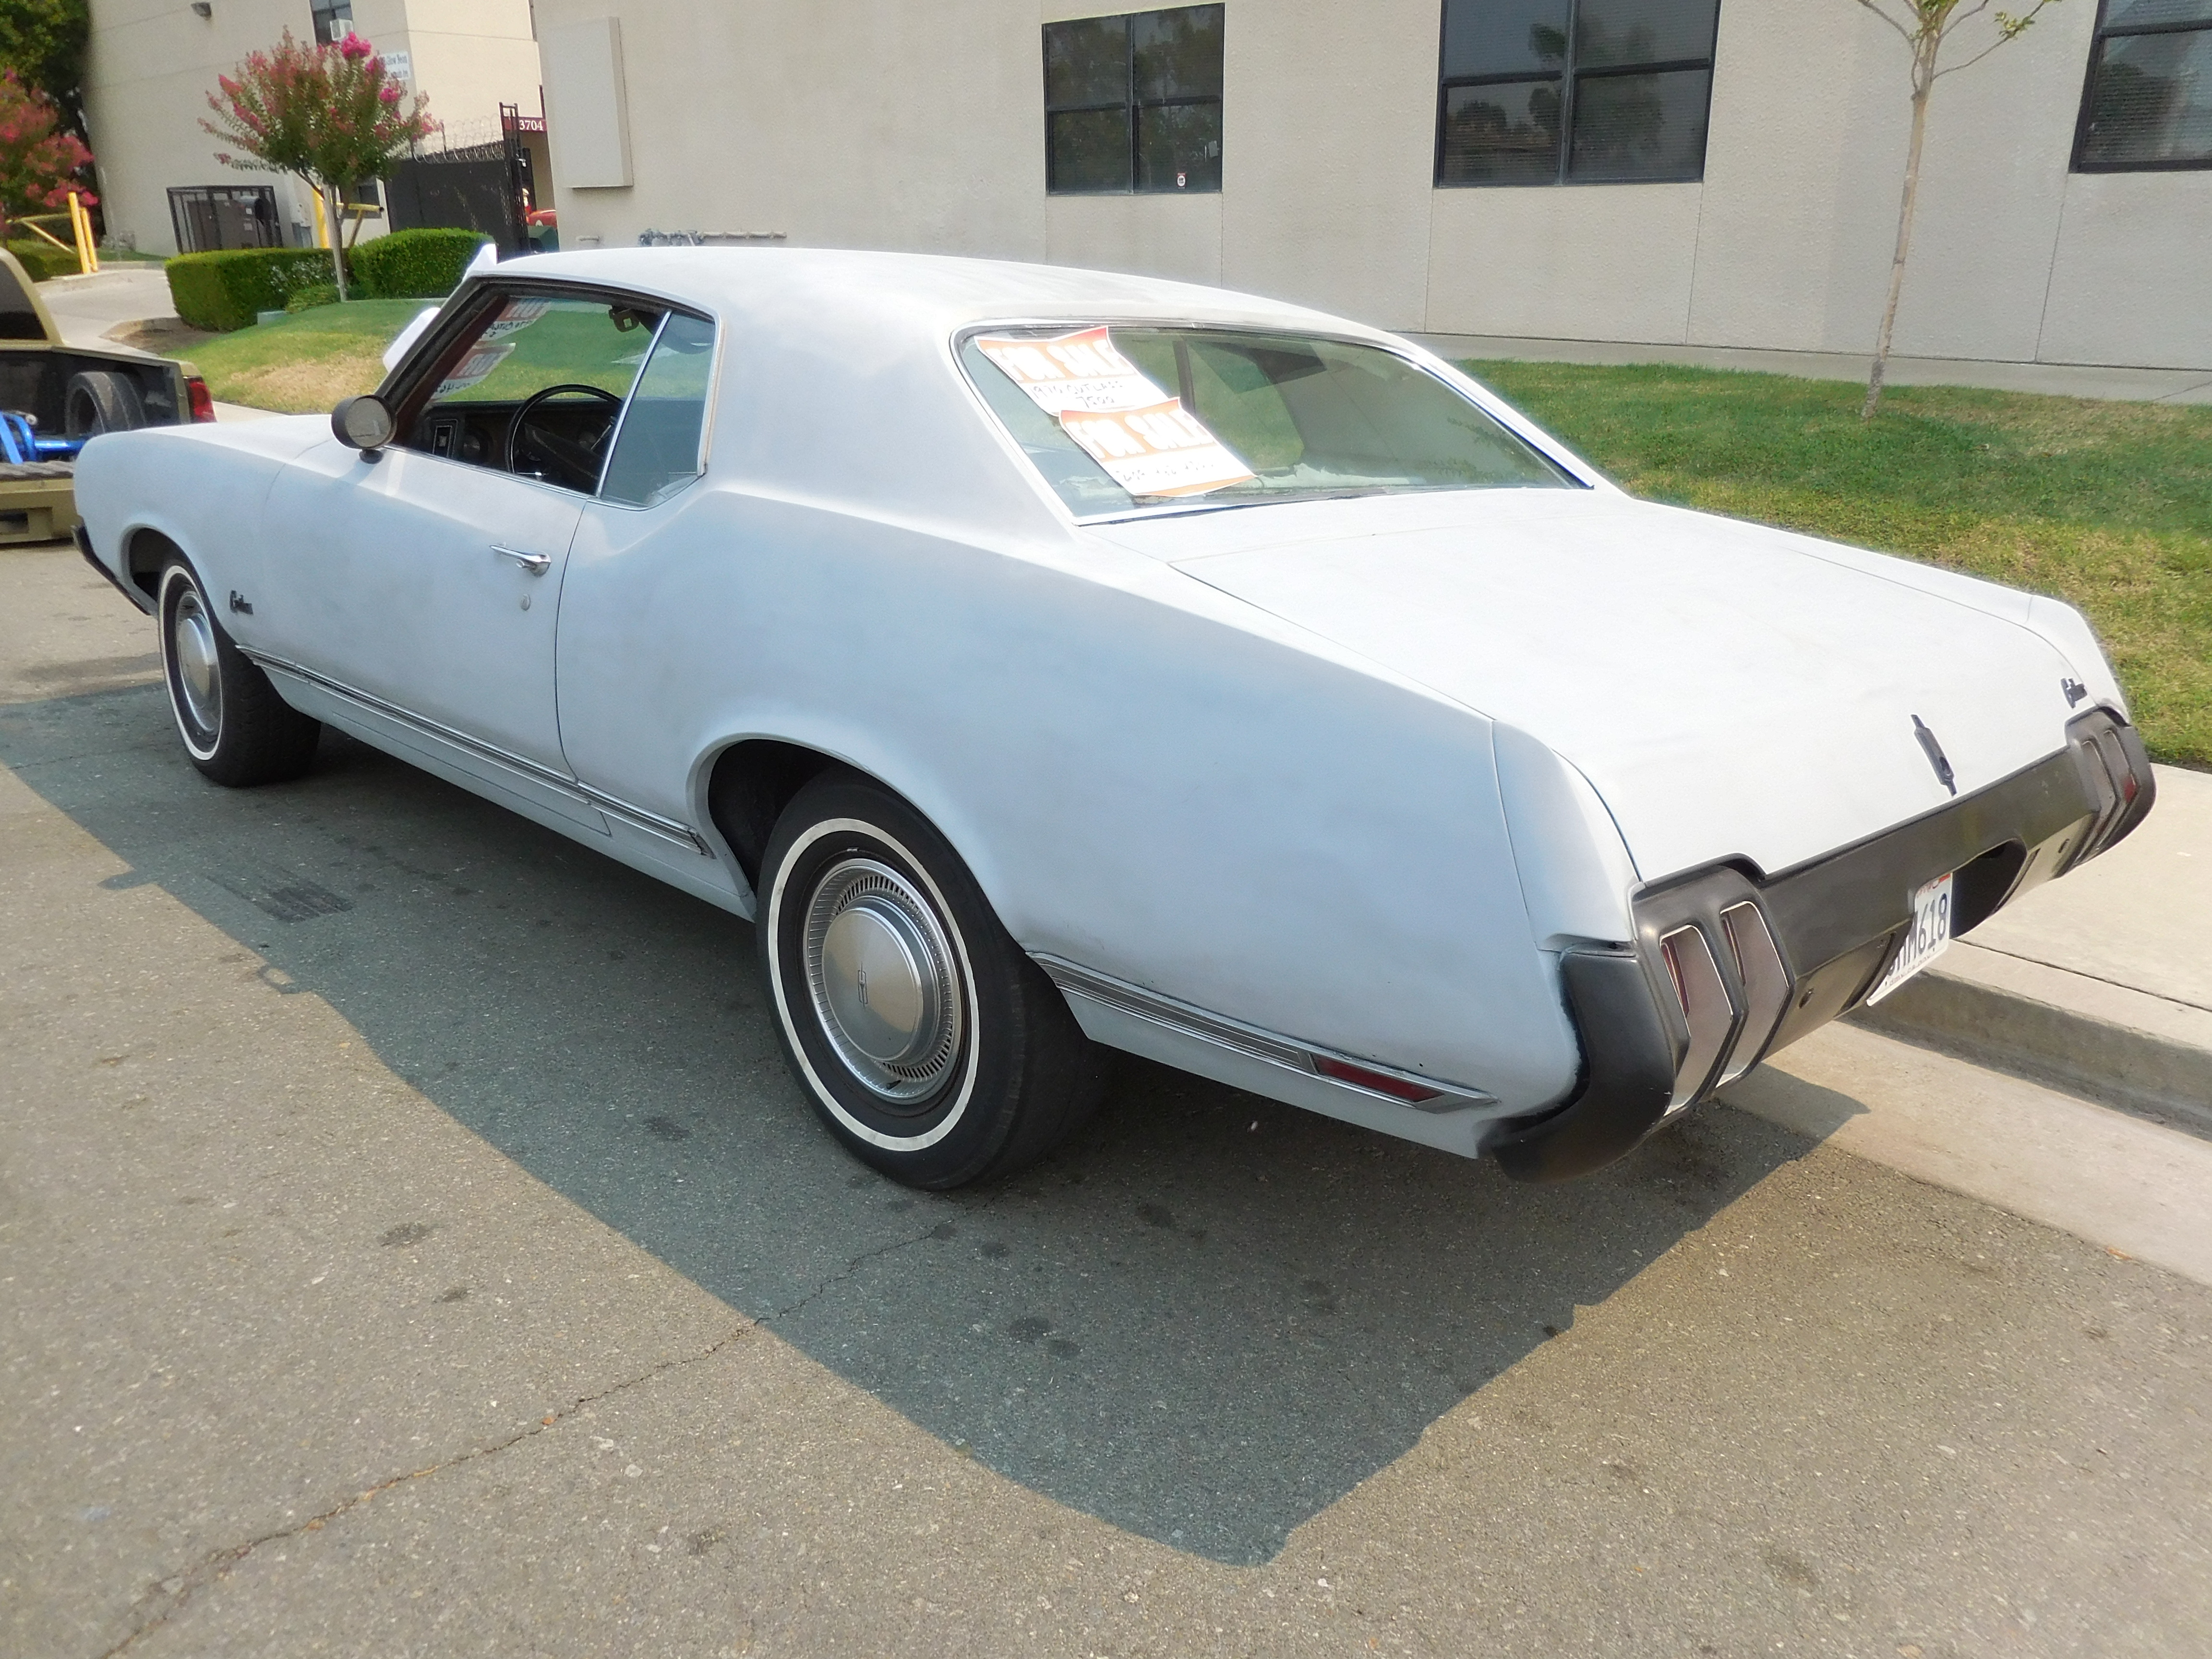 1970,1970, Oldsmobile, Cutlass, Supreme,cars for sale,cars,for,sale,